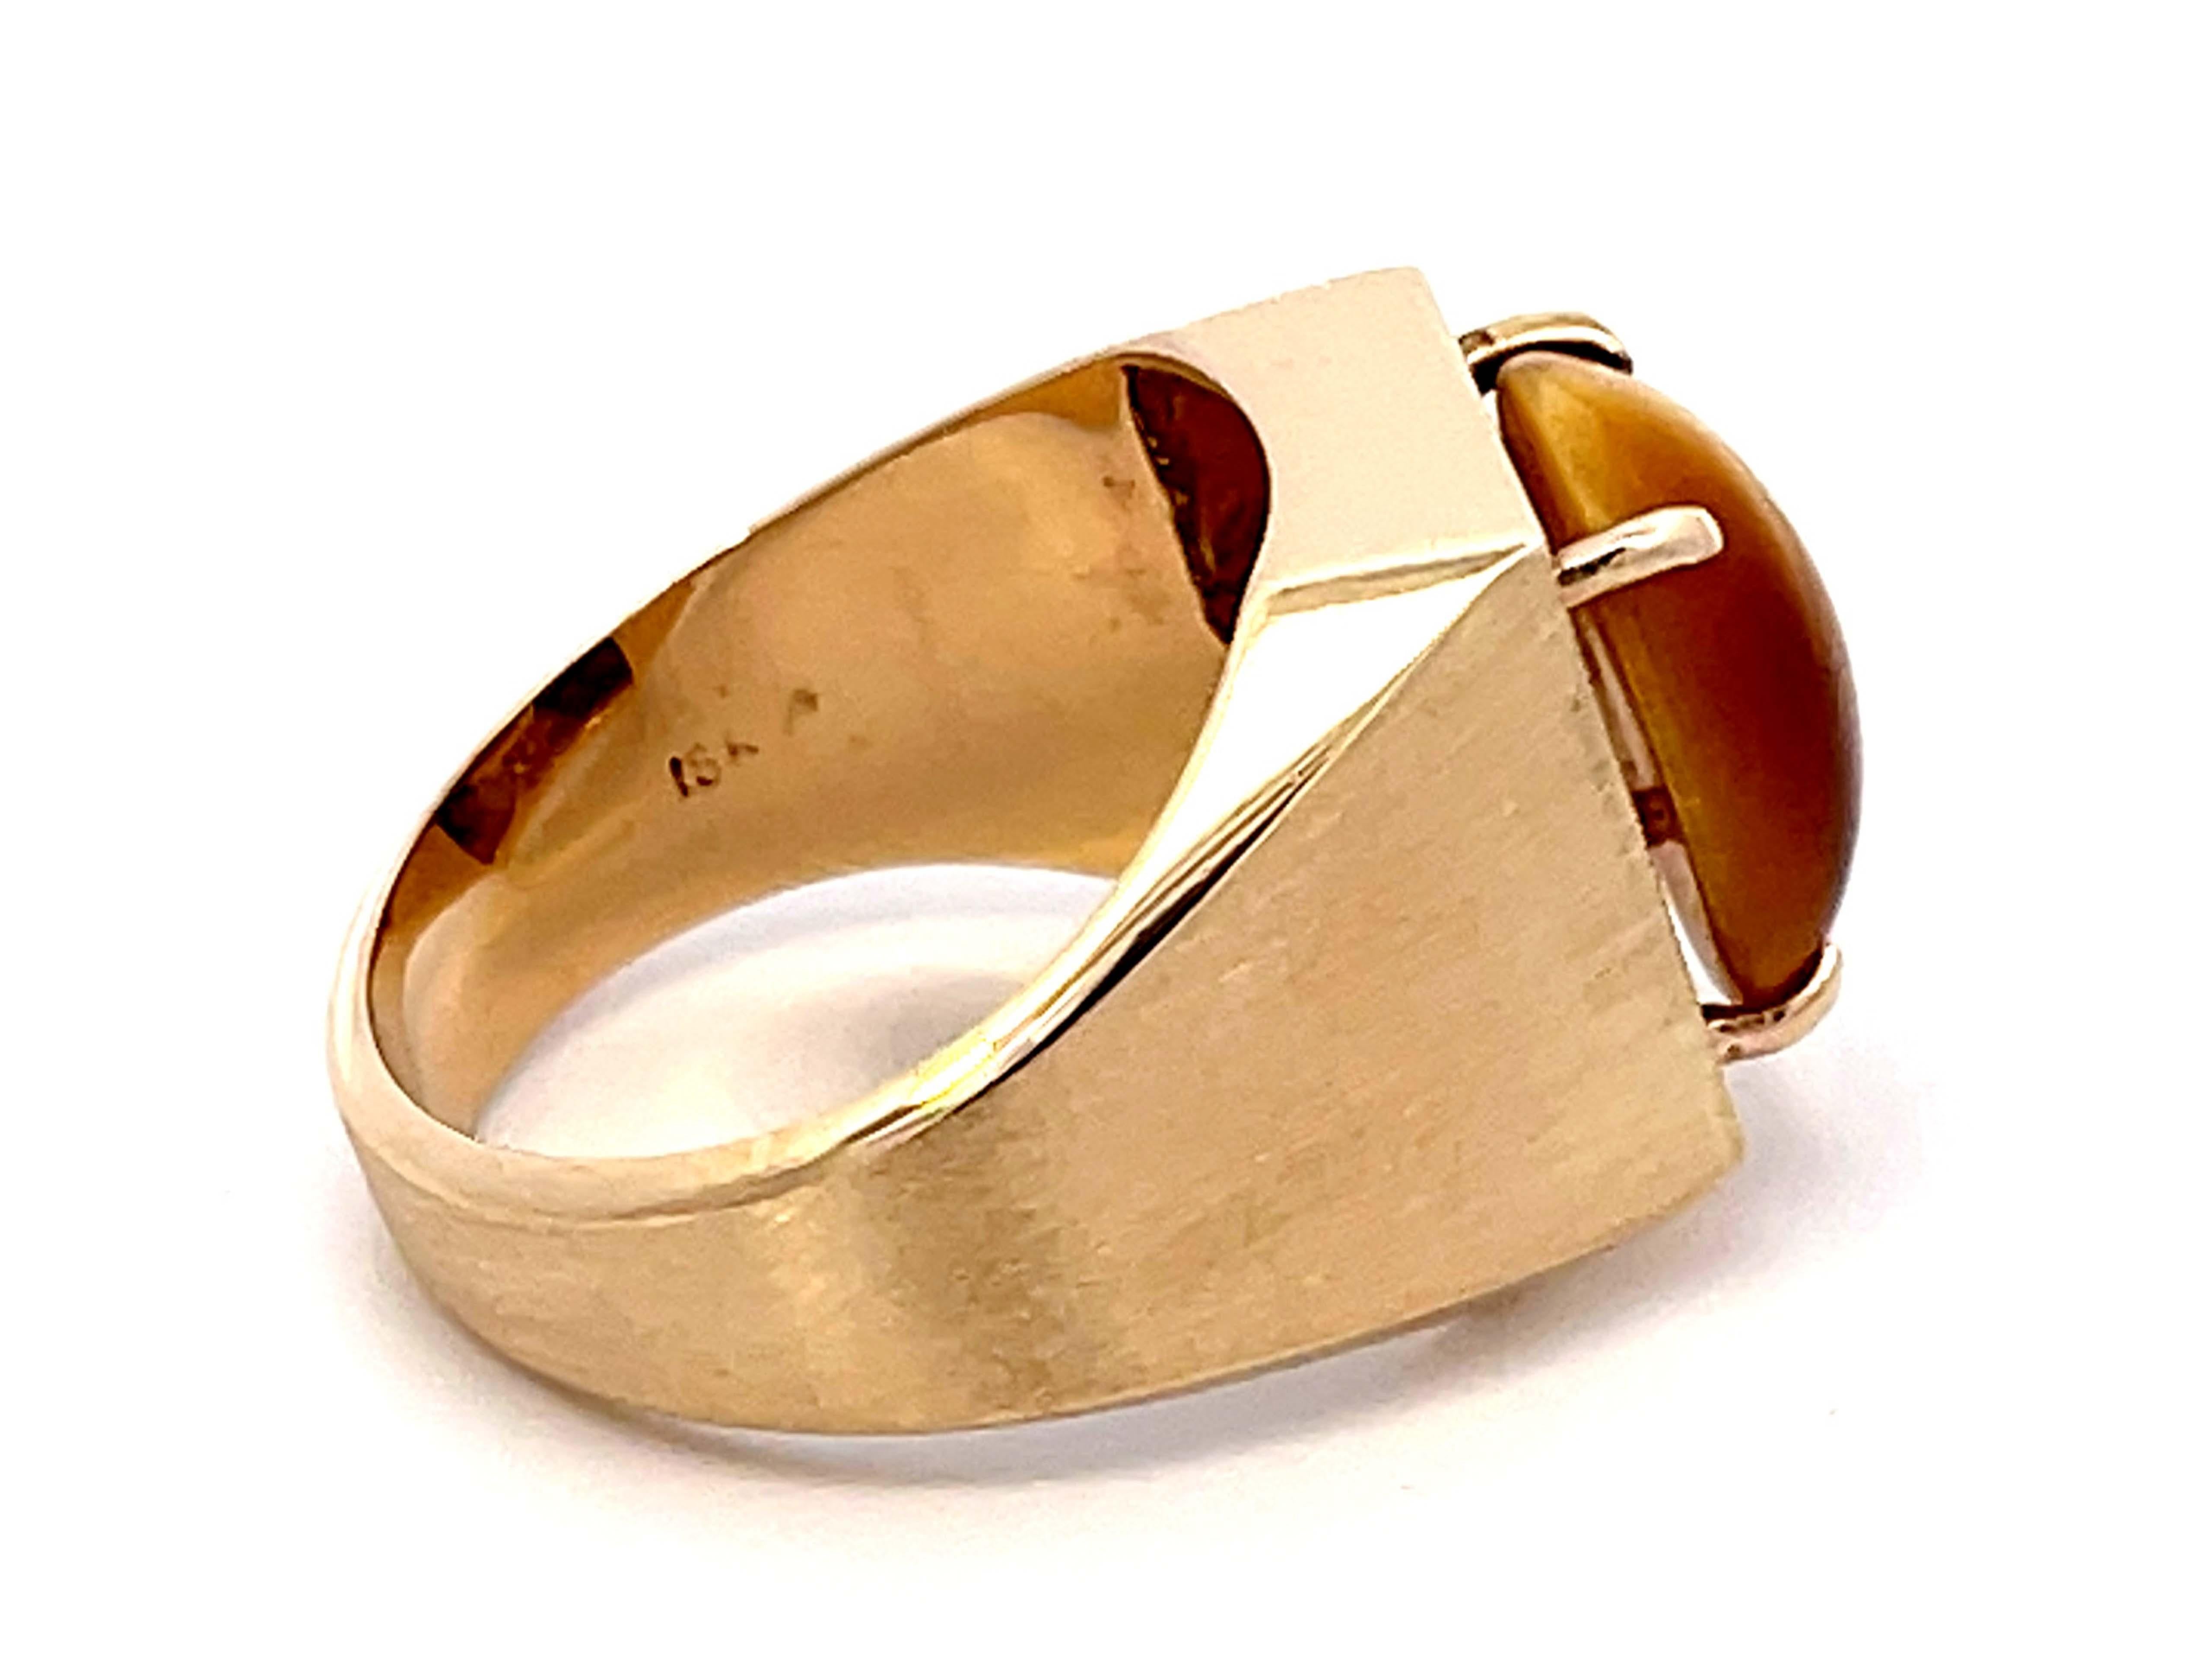 Tiger's Eye Satin Finish Ring in 18k Yellow Gold In Excellent Condition For Sale In Honolulu, HI